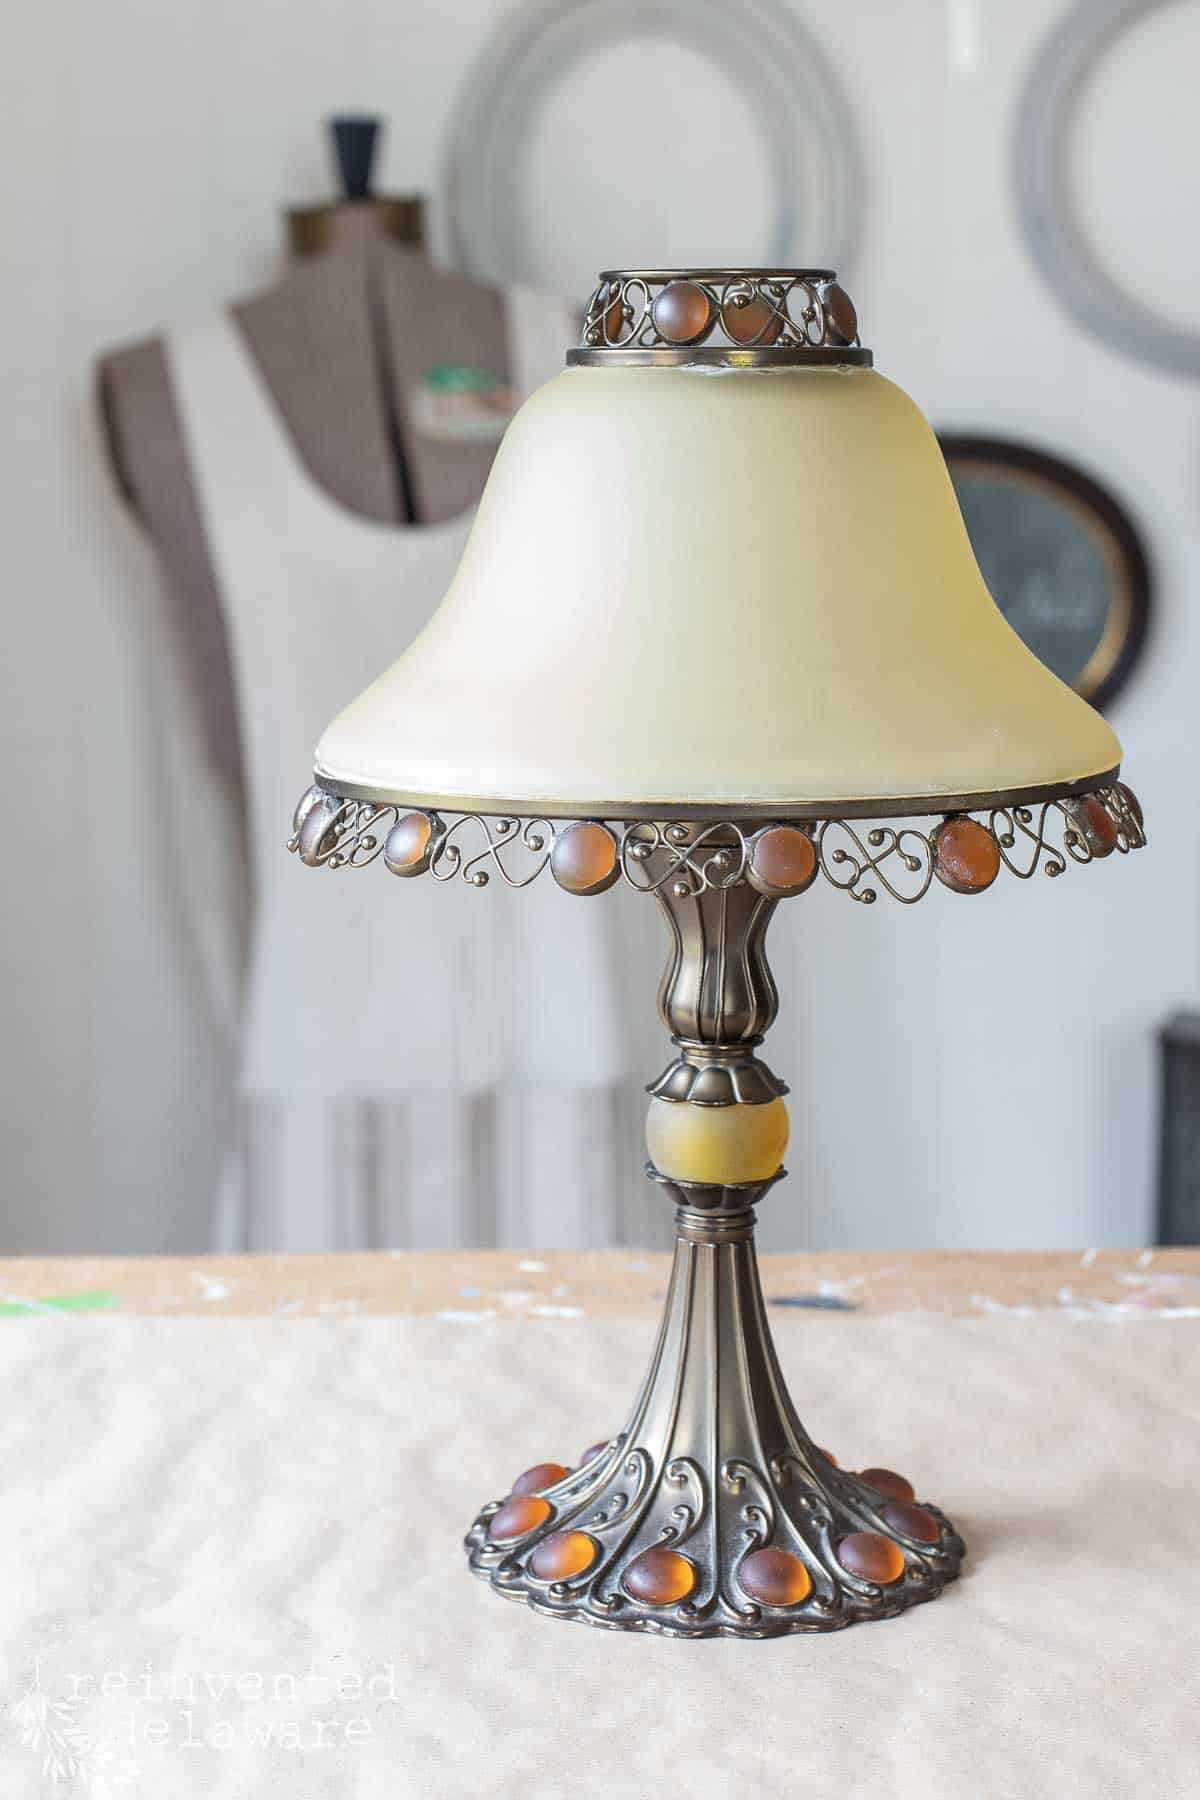 thrift store lamp with metal finish